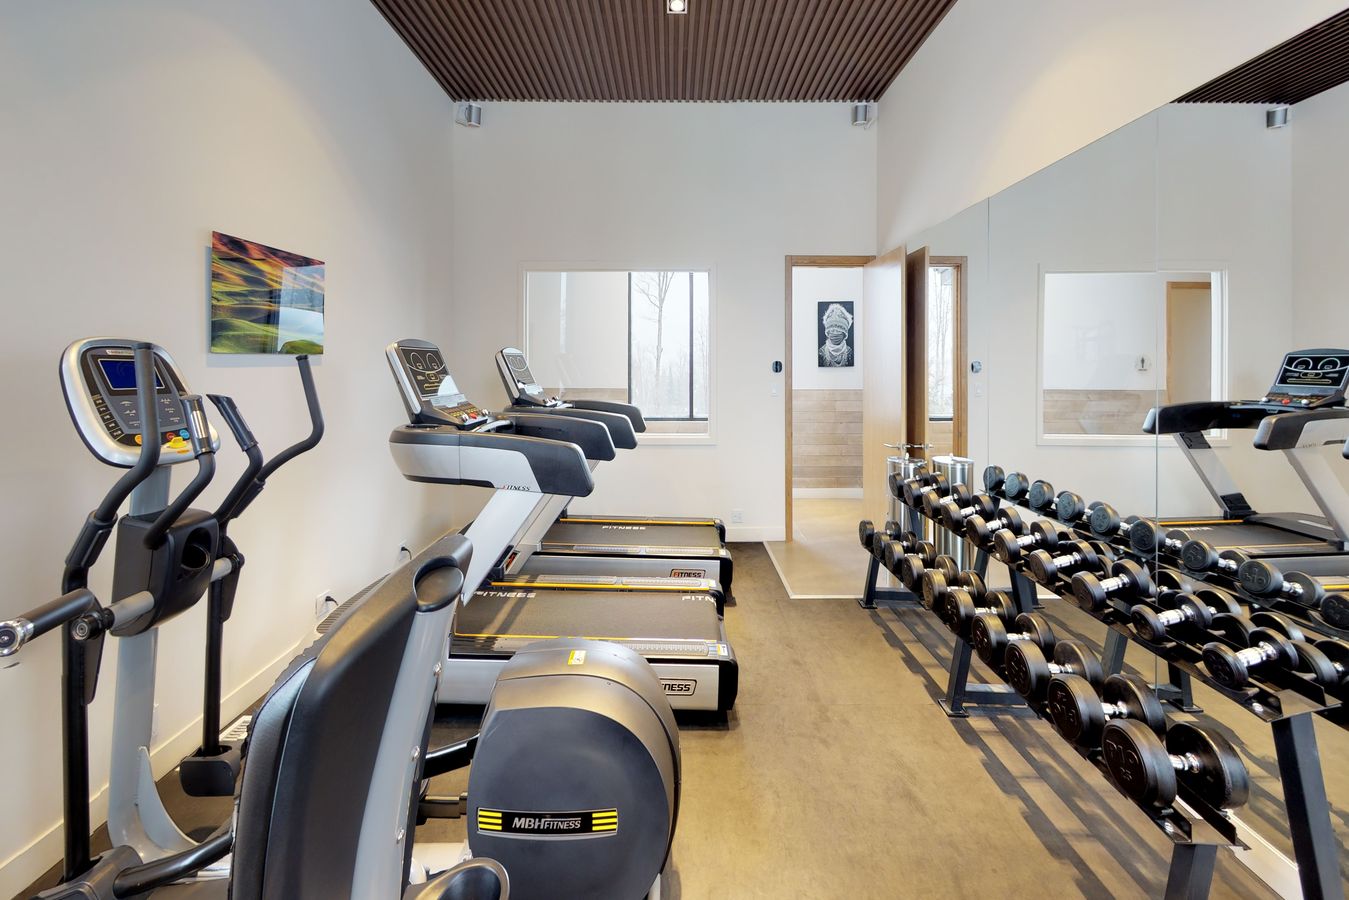 Bel Air bubble resort hotel Tremblant offers a gym, yoga, spa and more.